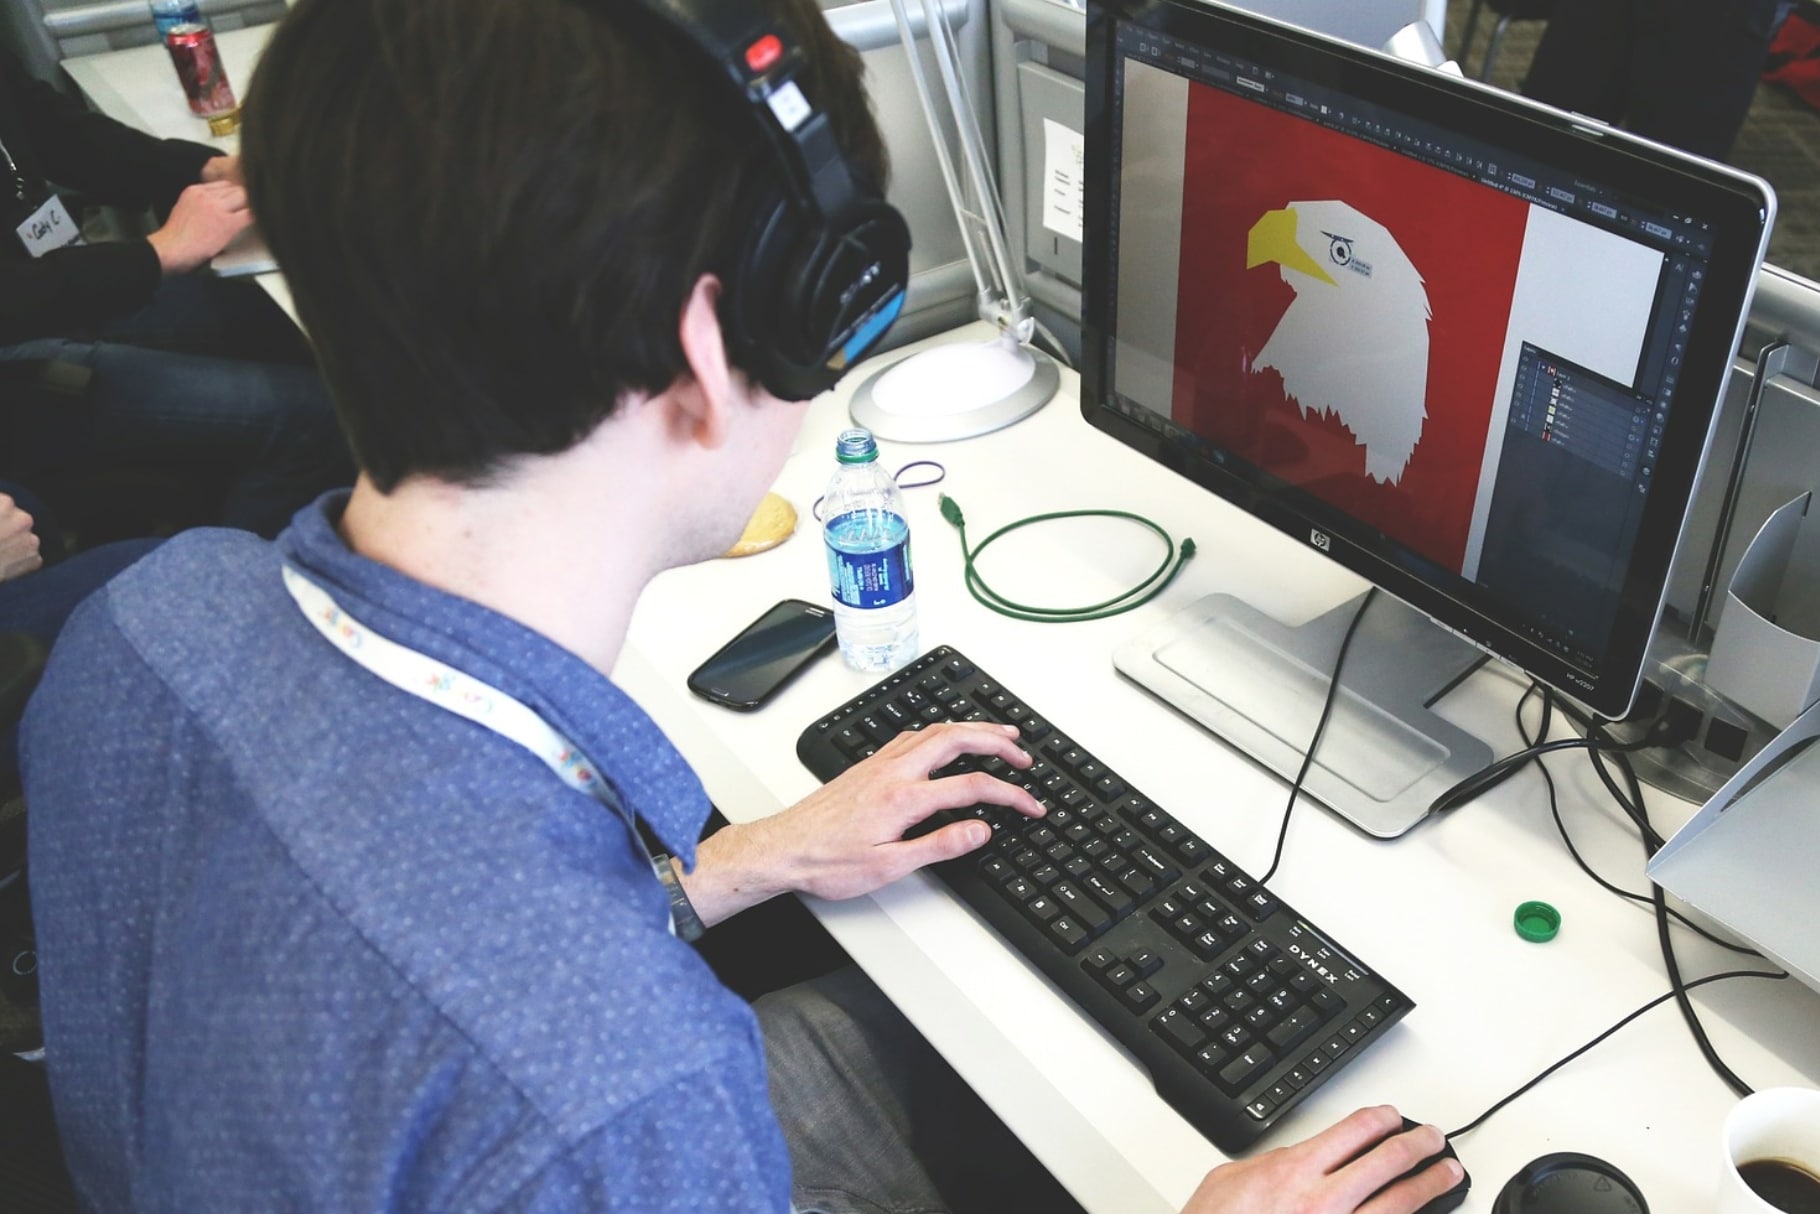 7 Kinds of Graphic Design Jobs and How Much They Make